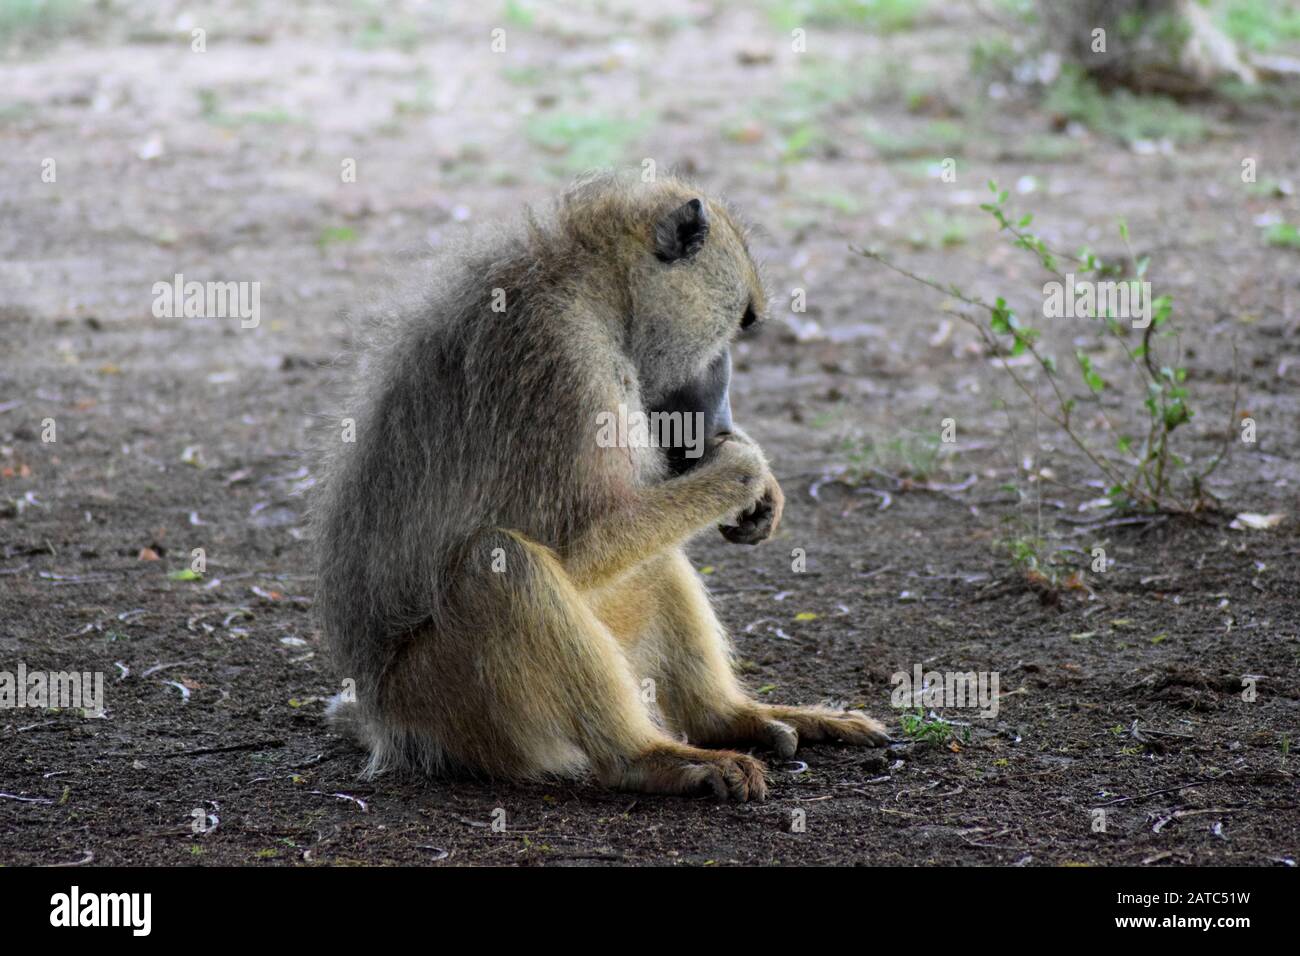 A young male baboon monkey feeding from the ground Stock Photo